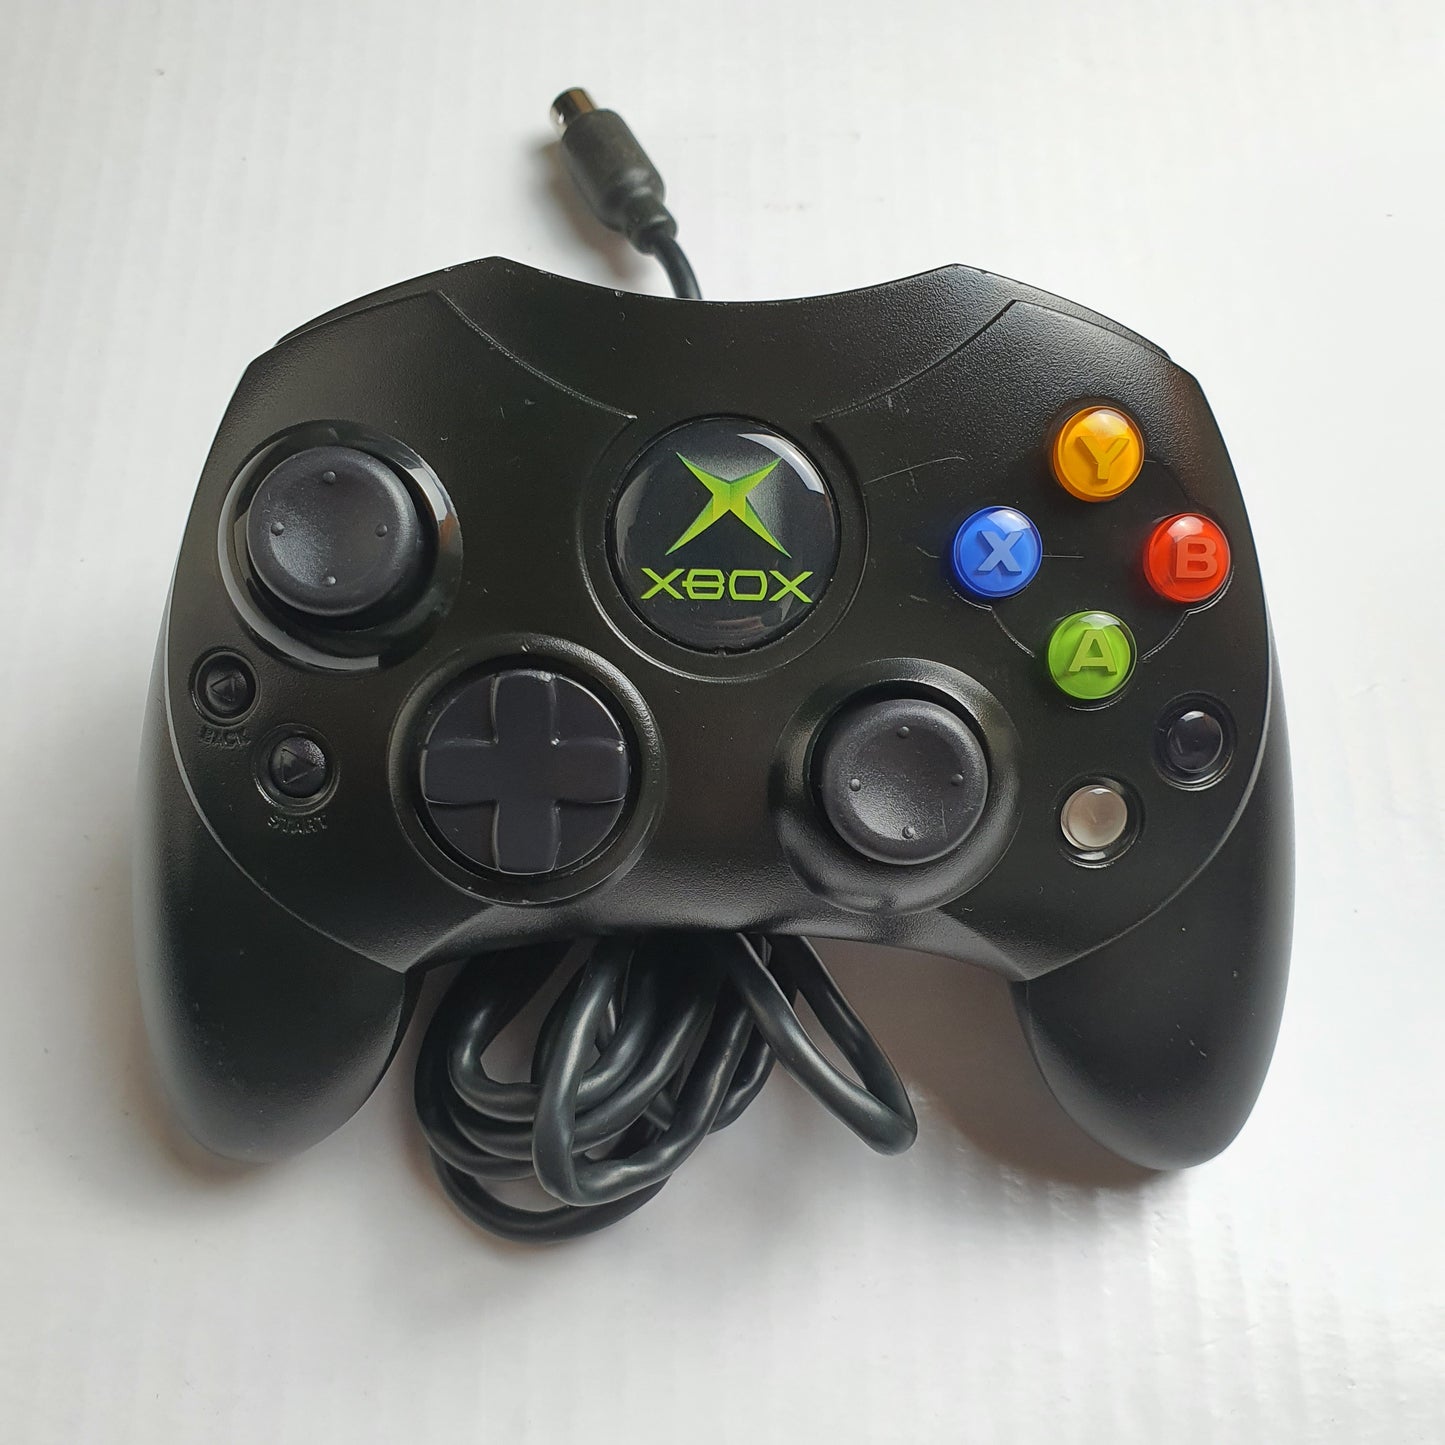 Official Microsoft Xbox (Original) S Wired Controller